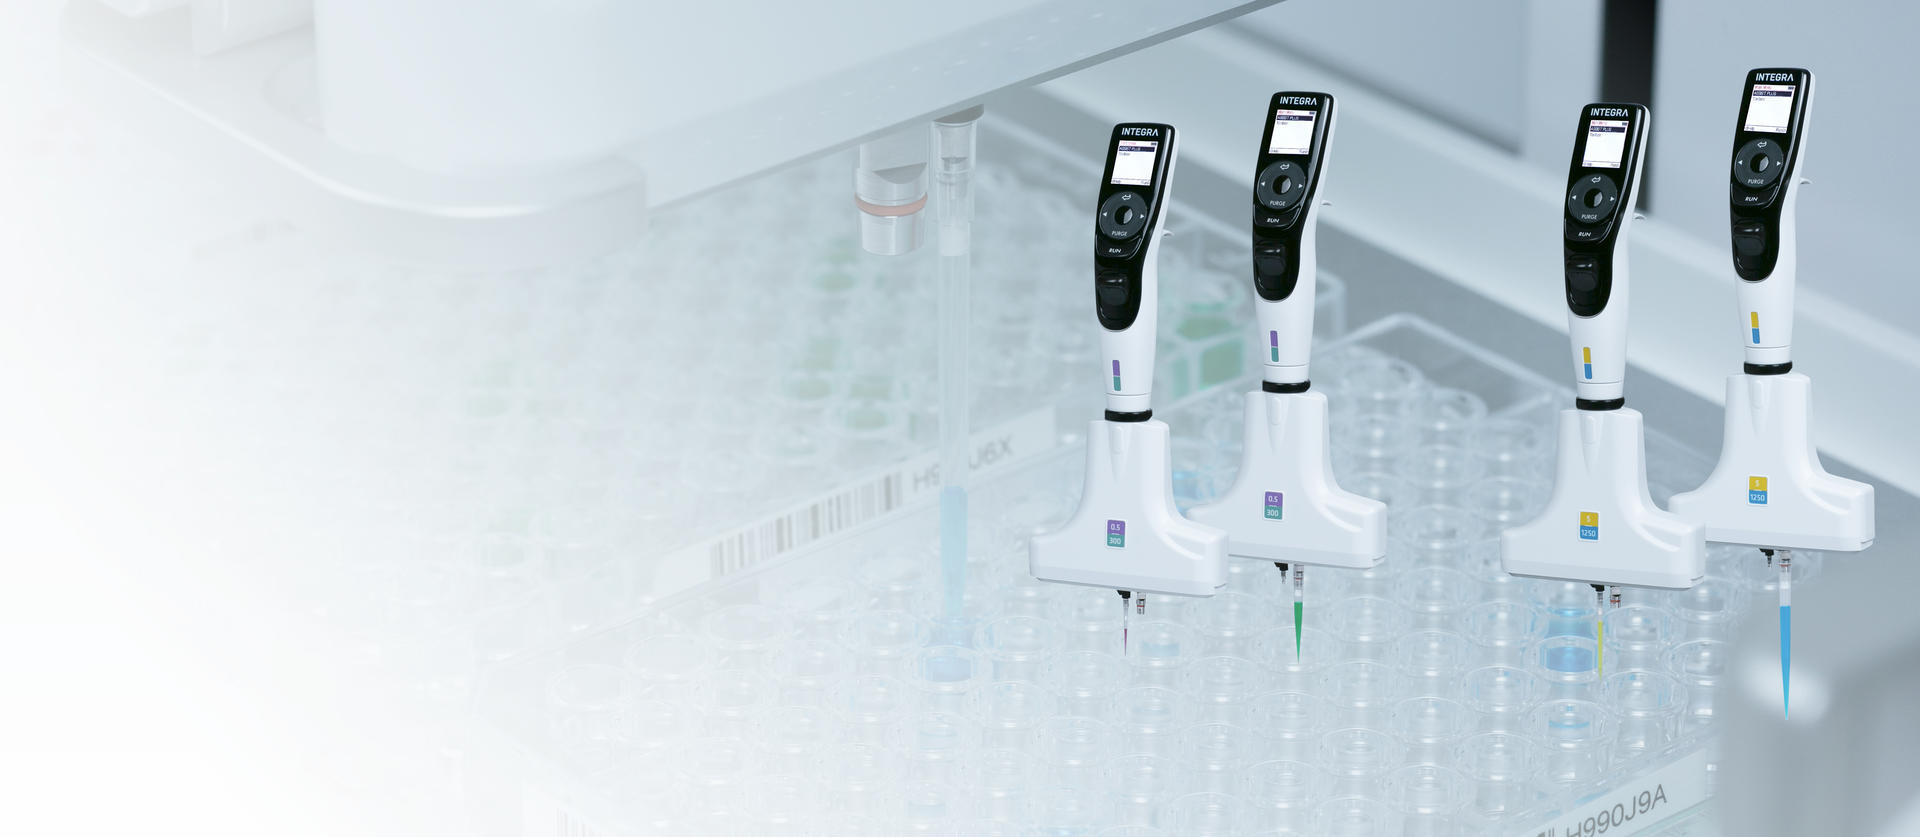 Win a VIAFLO 96 handheld electronic pipette bundle to take microplate  pipetting to the next level